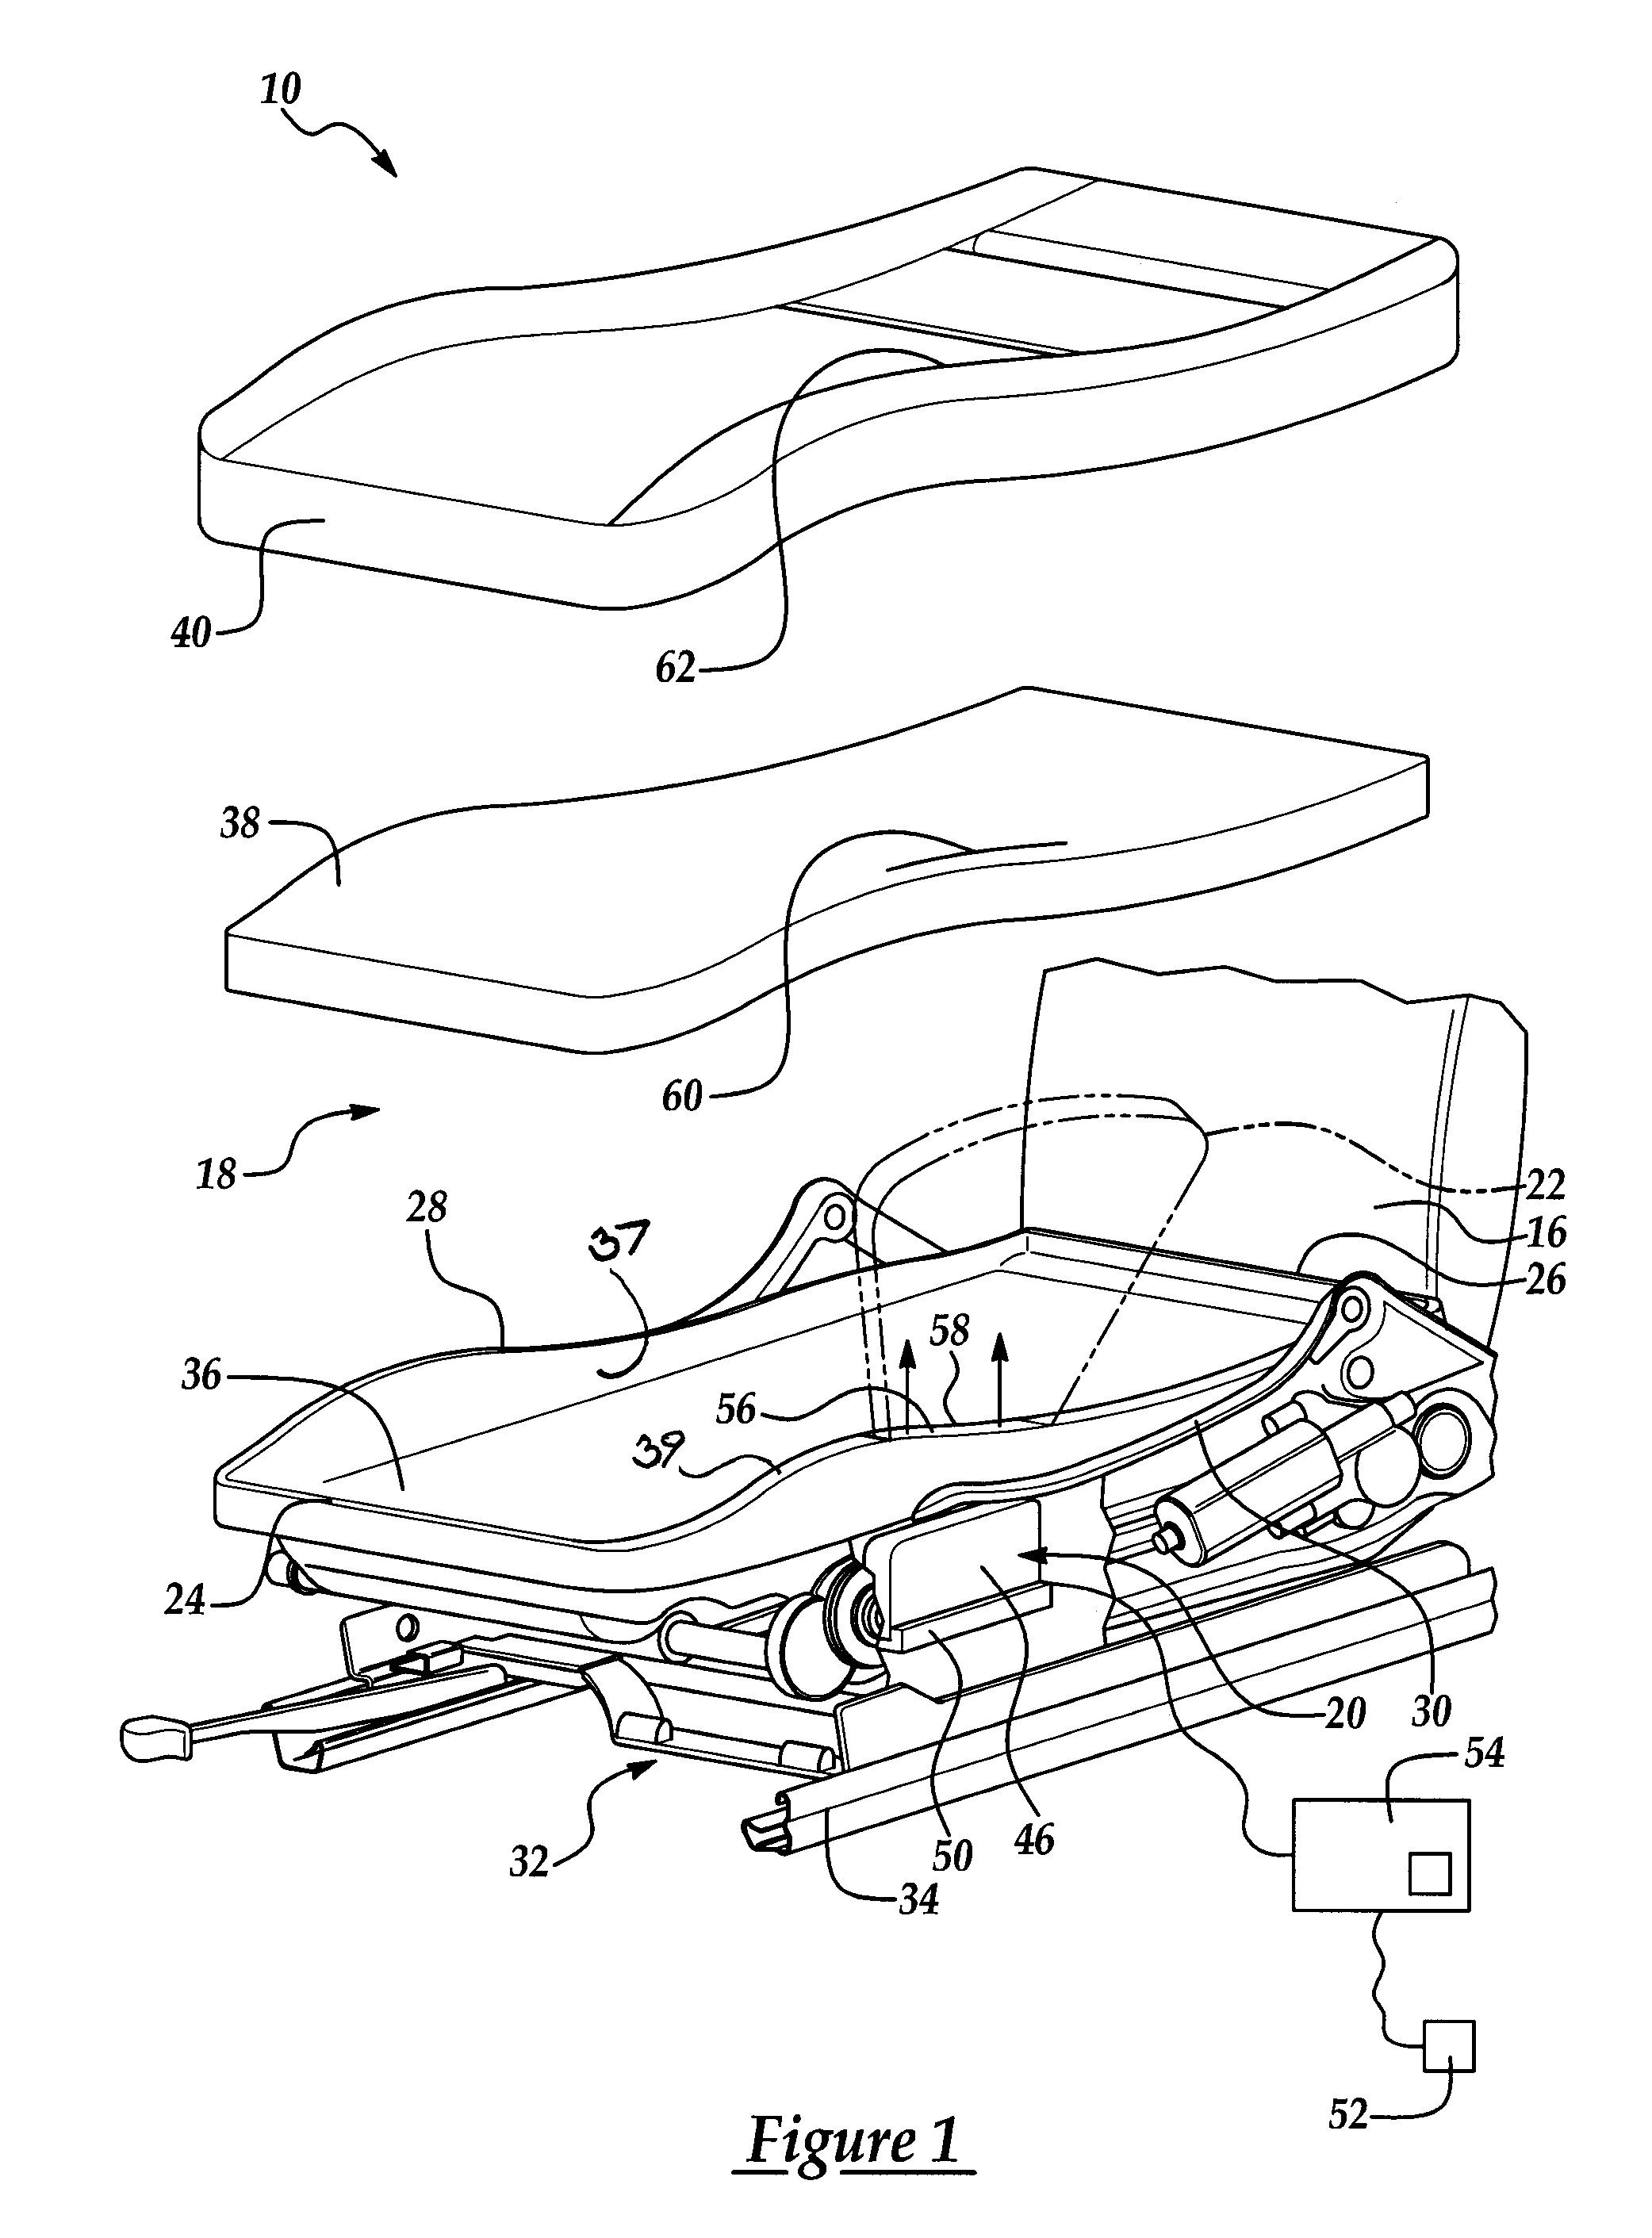 Inflatable airbag system for vehicle seat assembly